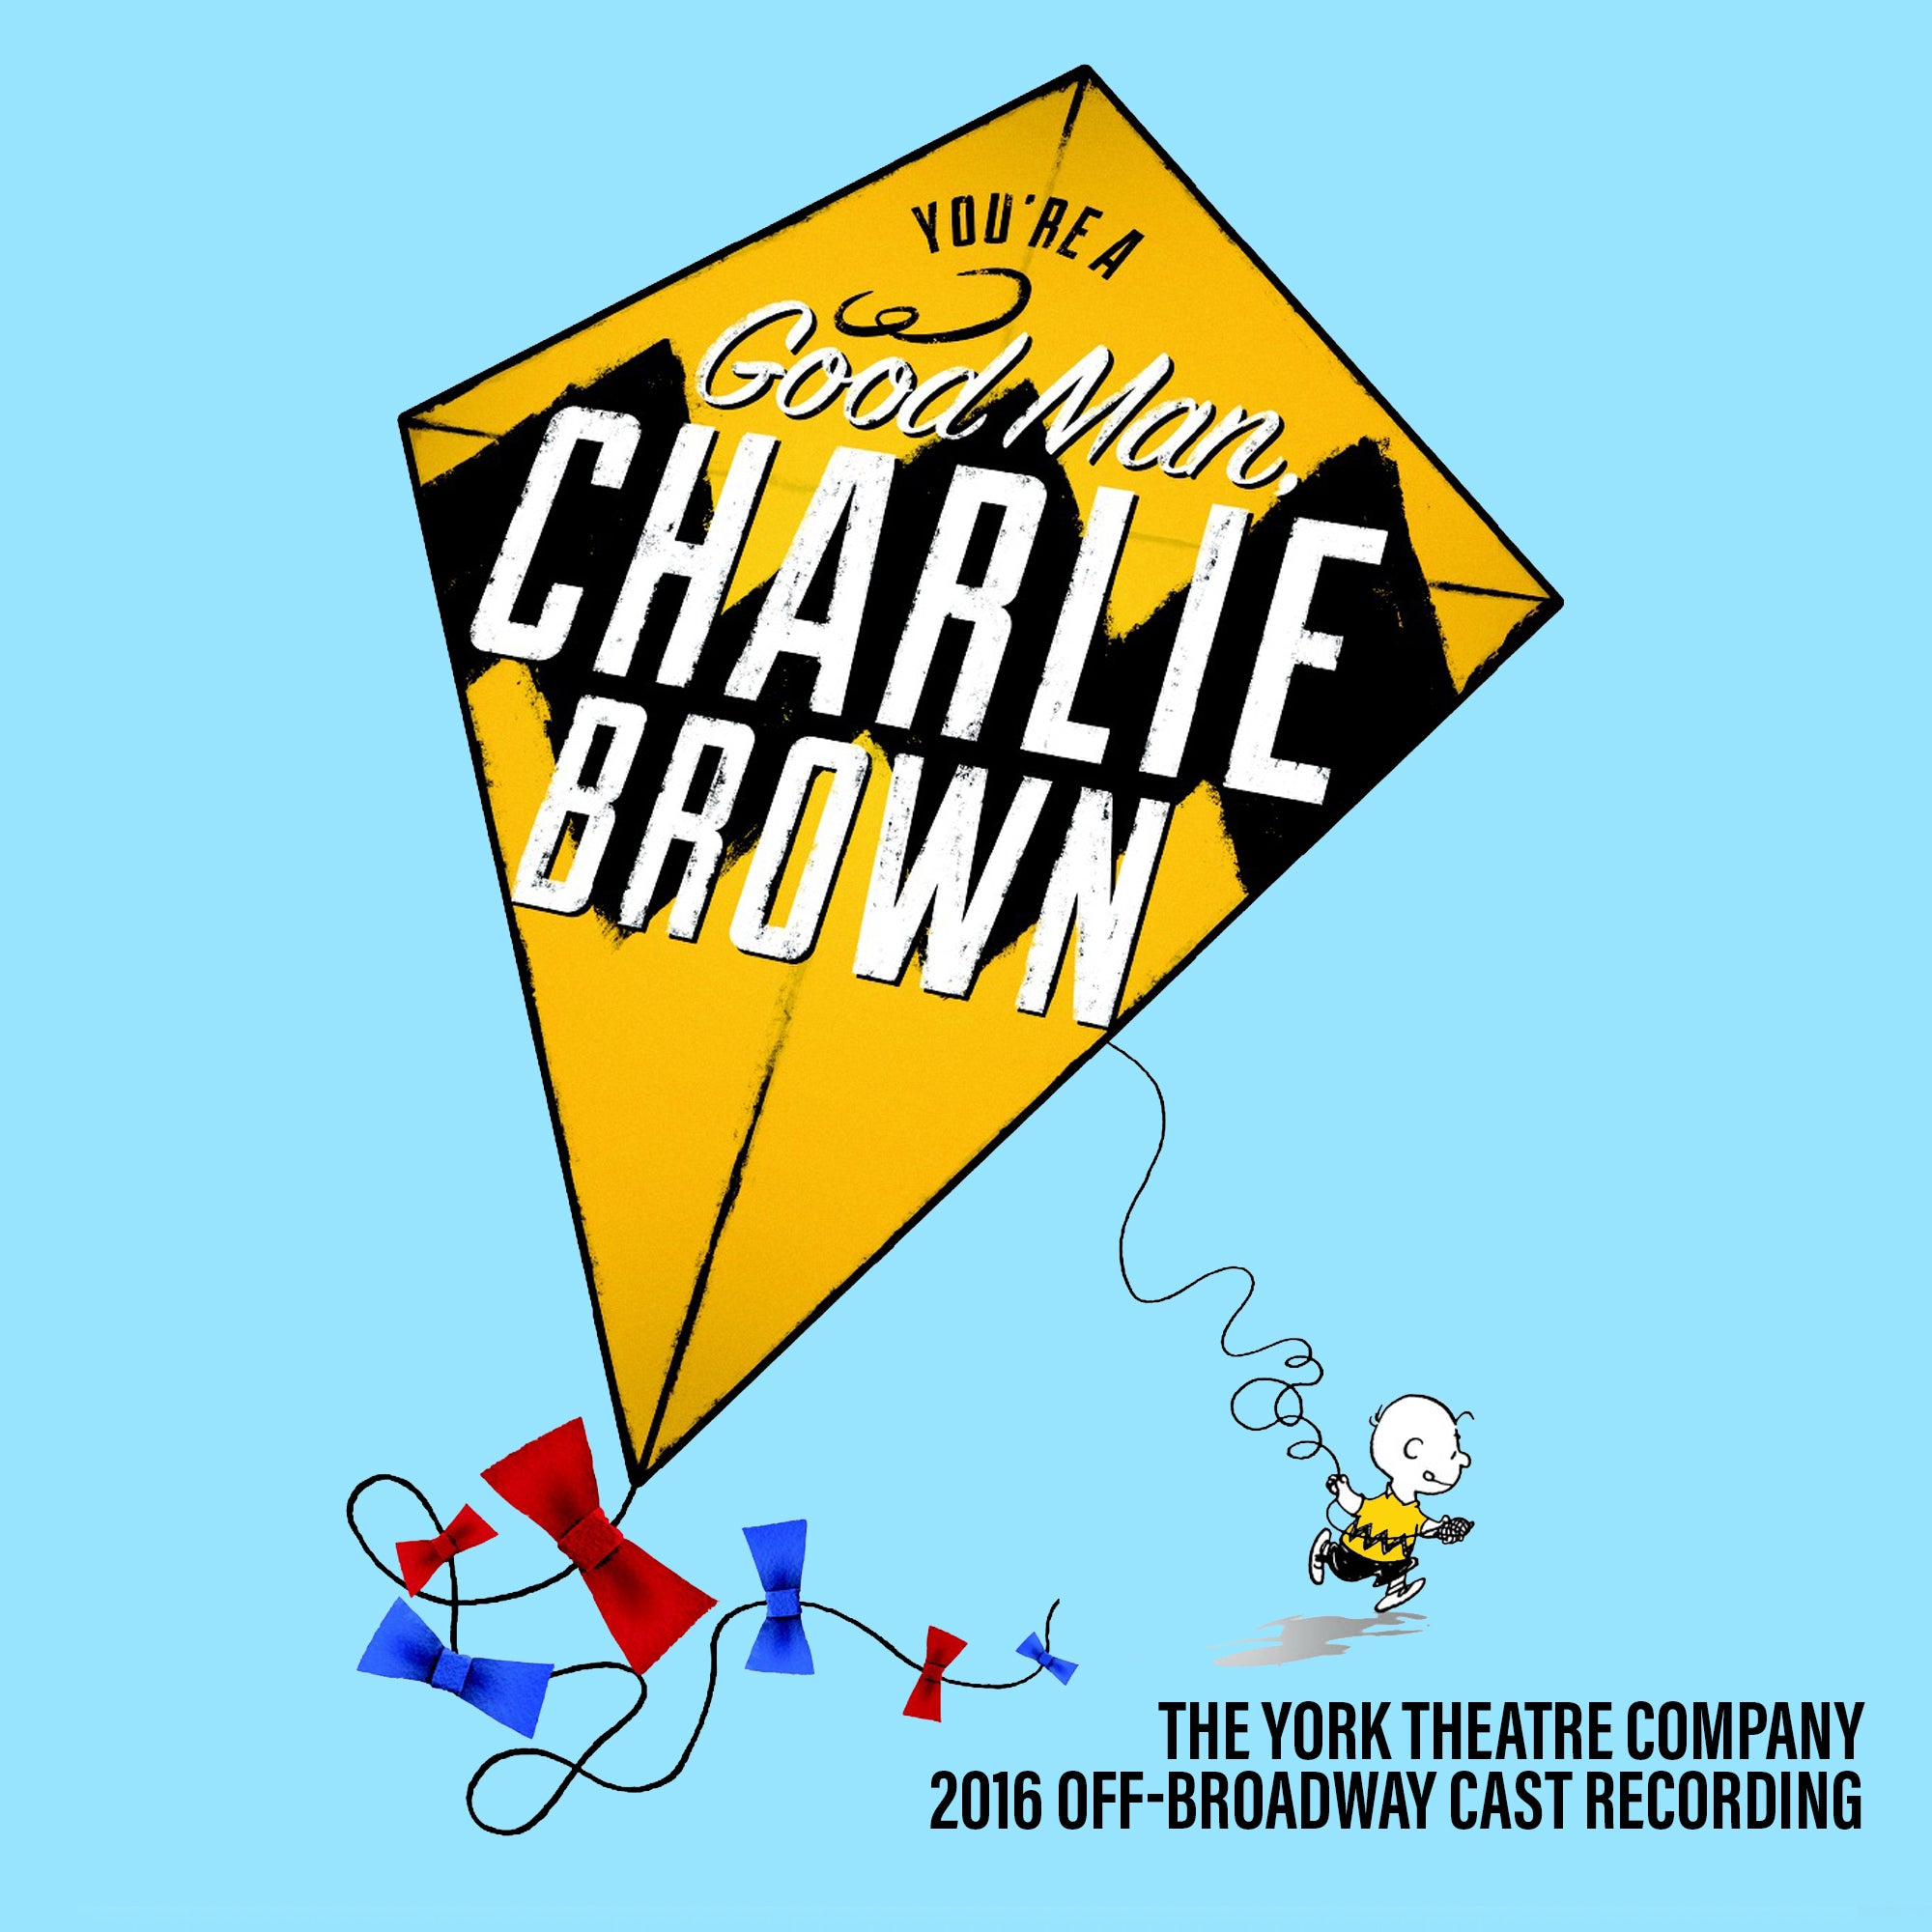 You're a Good Man, Charlie Brown (2016 Off-Broadway Cast Recording) [CD]